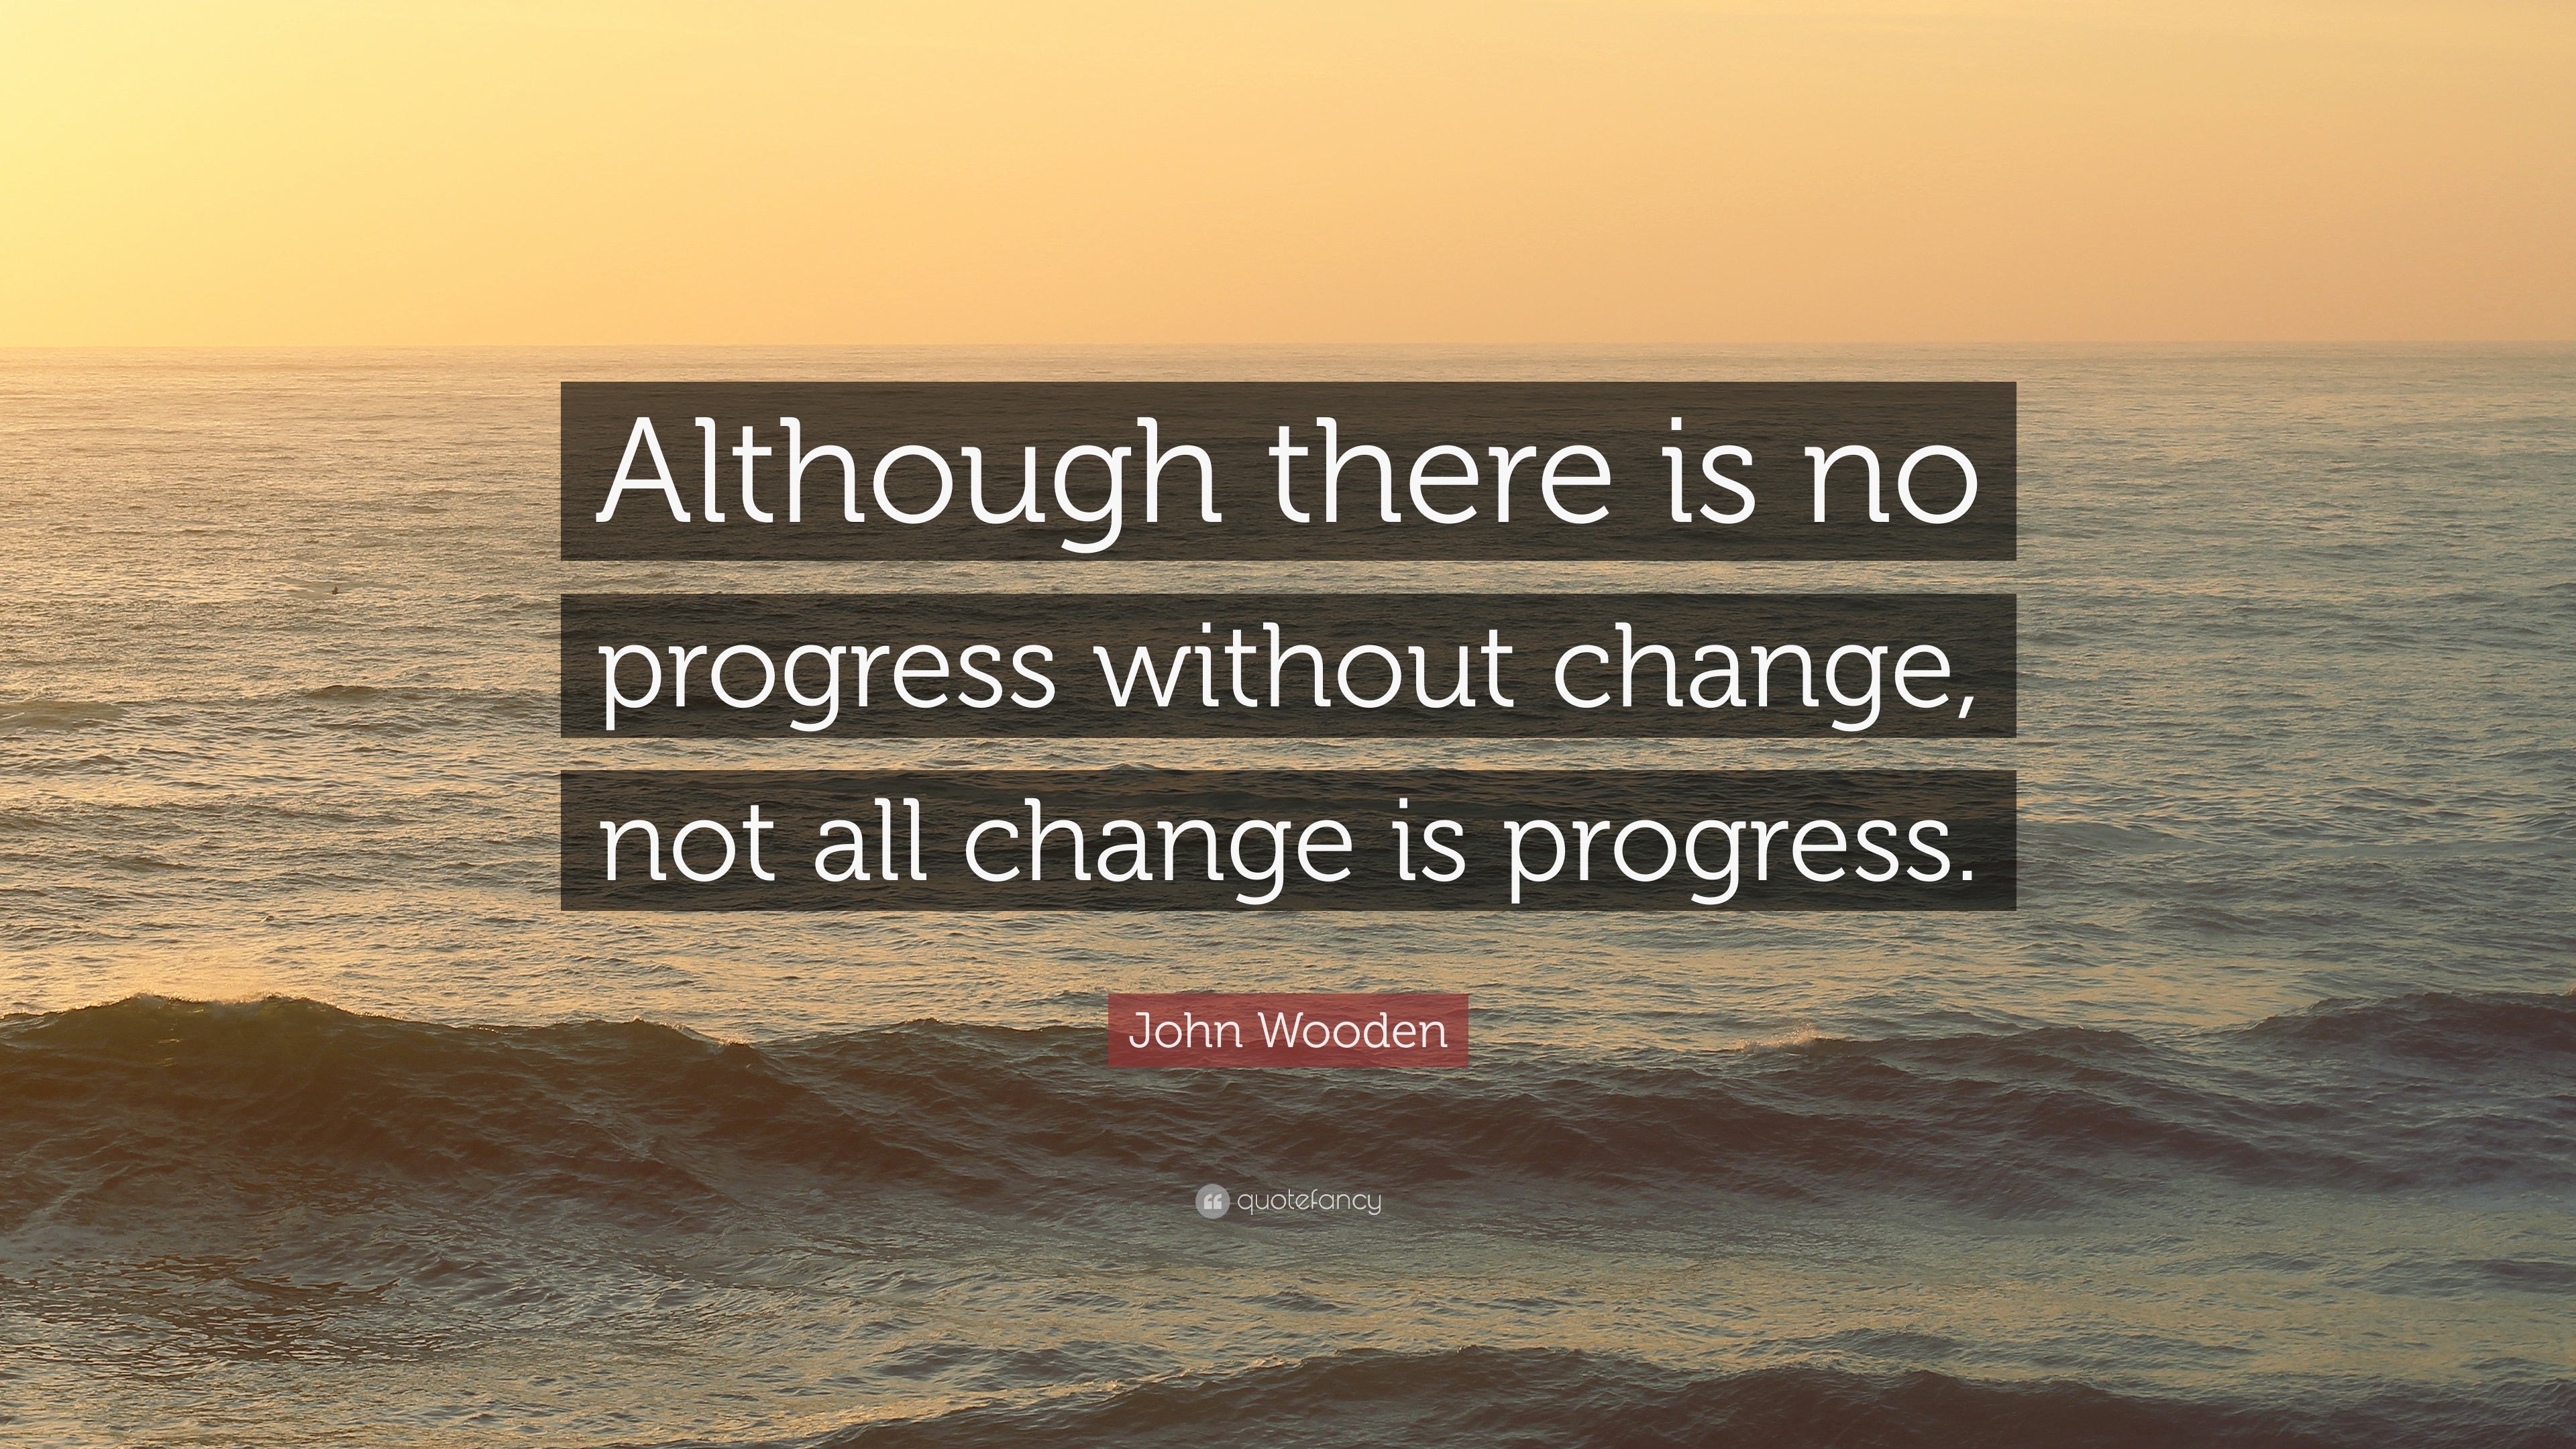 John Wooden Quote: “Although there is no progress without change, not ...